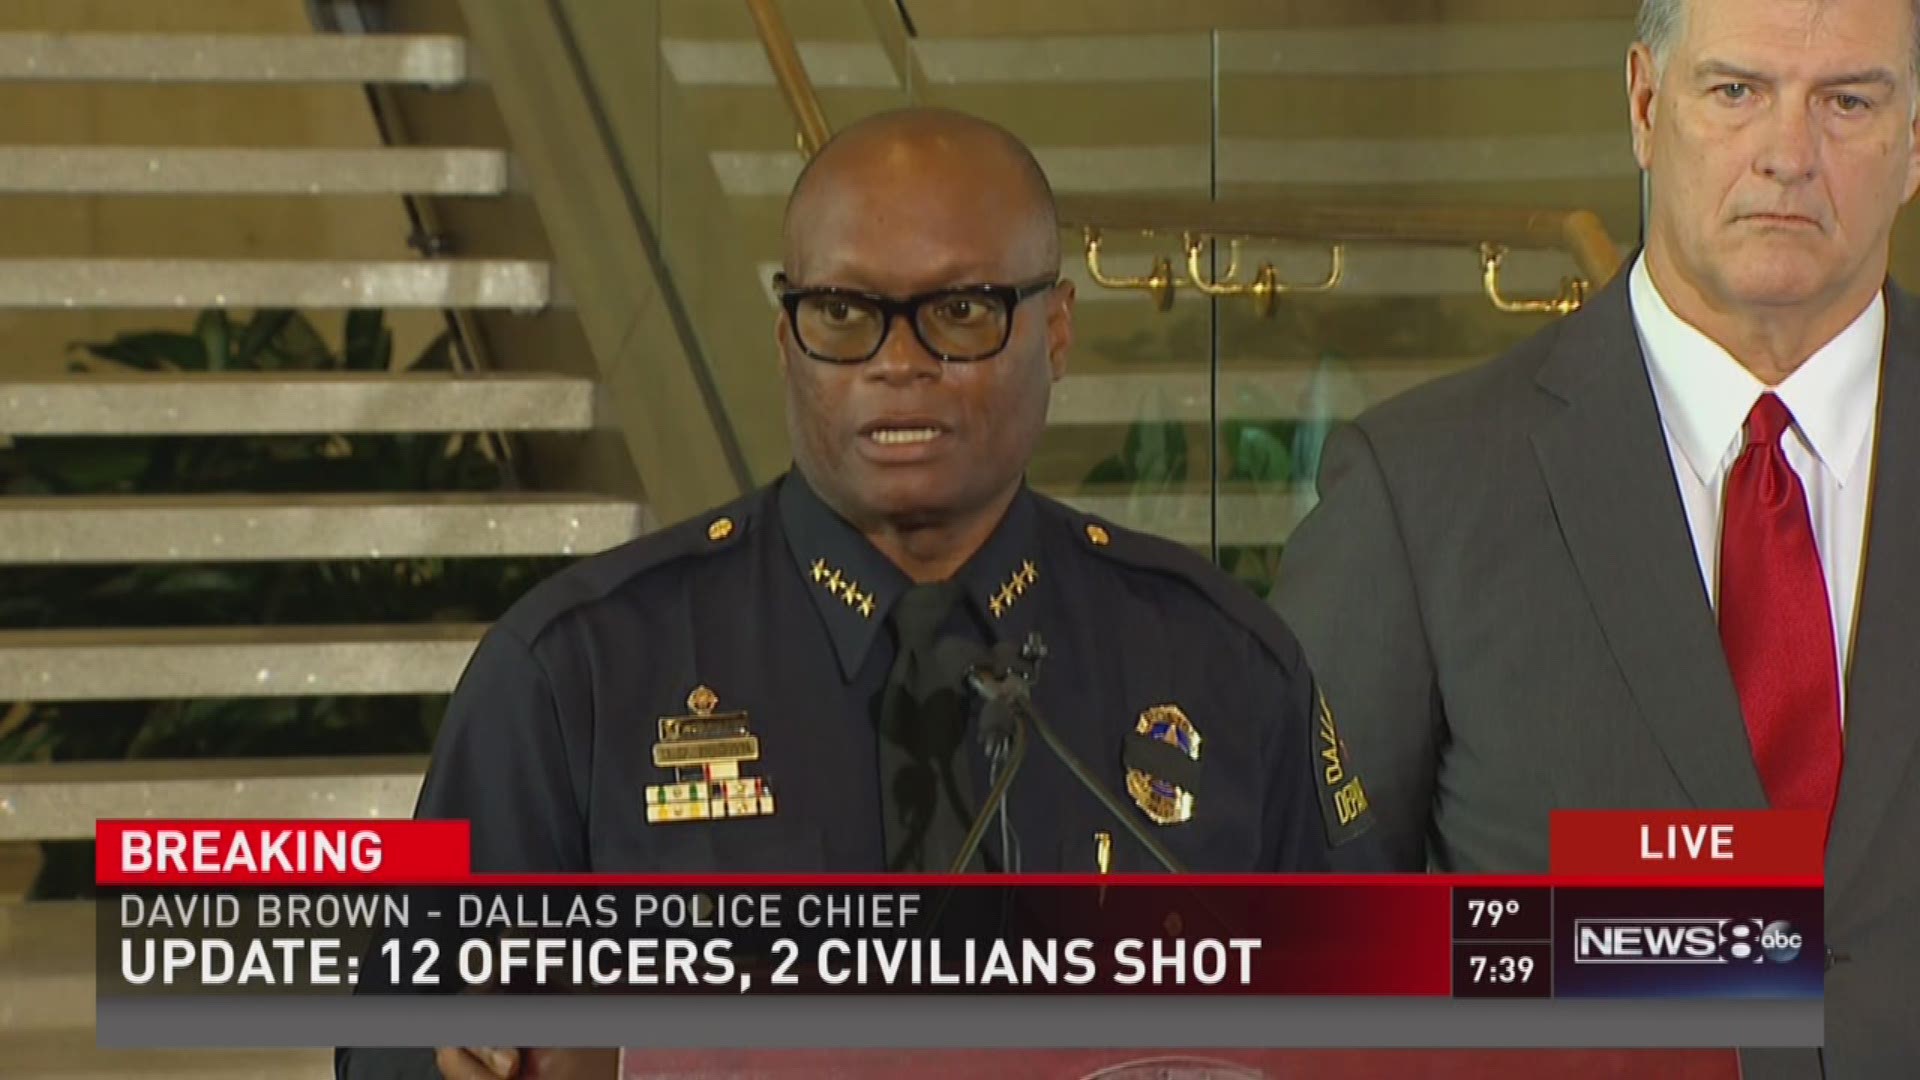 An update from Dallas Mayor Mike Rawlings and Dallas Police Chief David Brown. They say the suspect in the standoff is dead and a criminal investigation is underway.